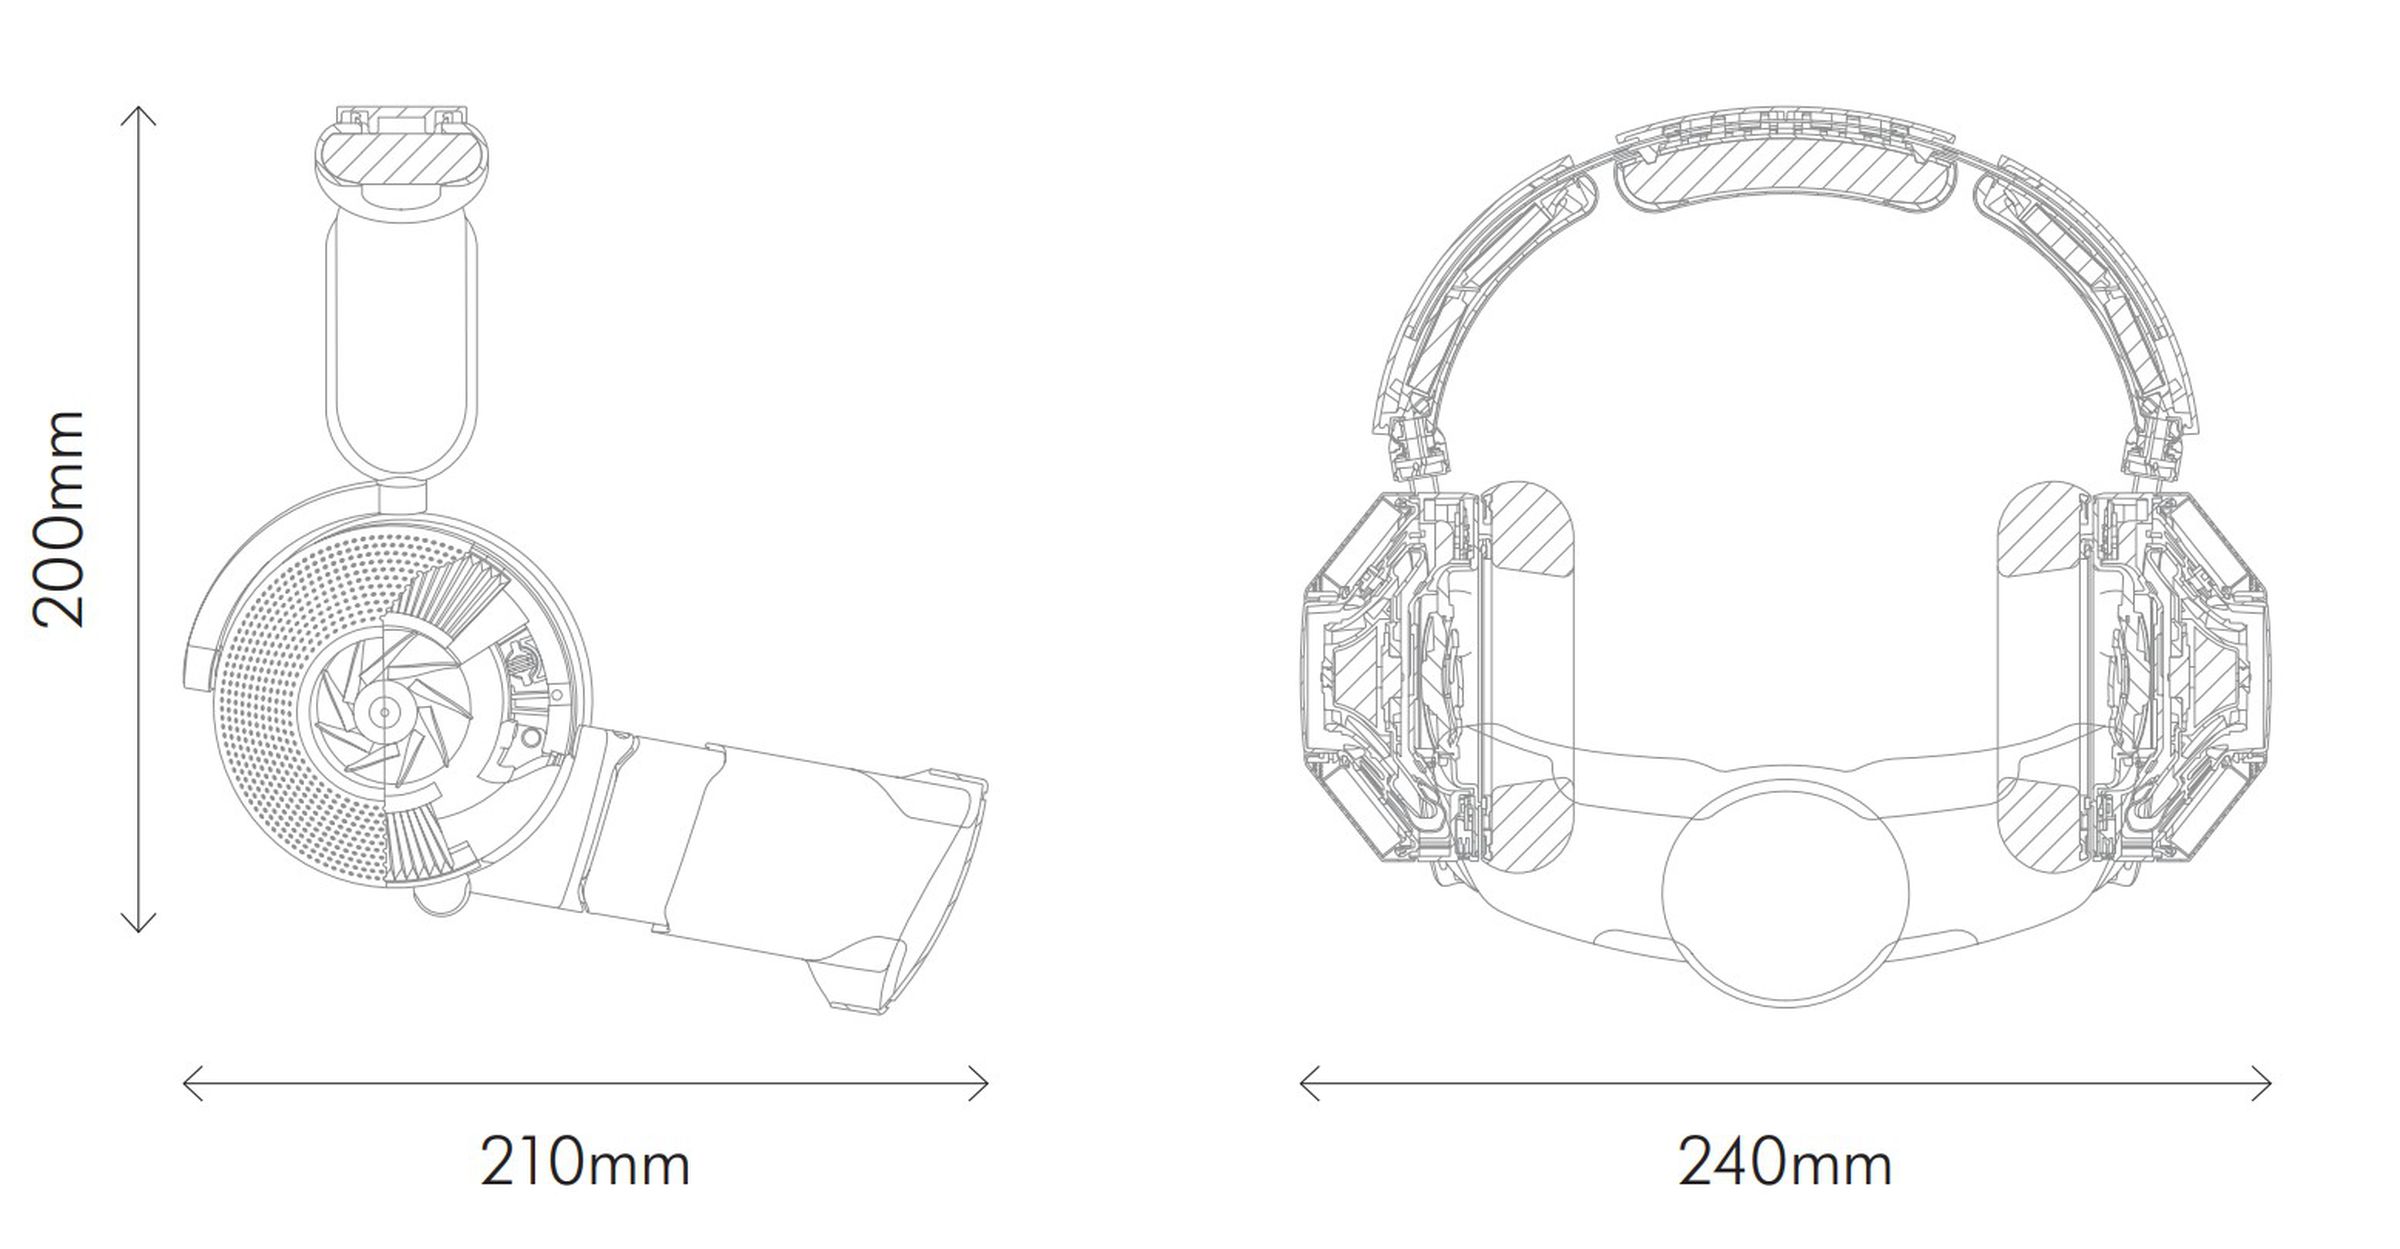 An illustration showing the design blueprints for the Dyson Zone.  Measurements say the headphones are 200mm high, 240mm wide and 210mm deep with the visor attached.